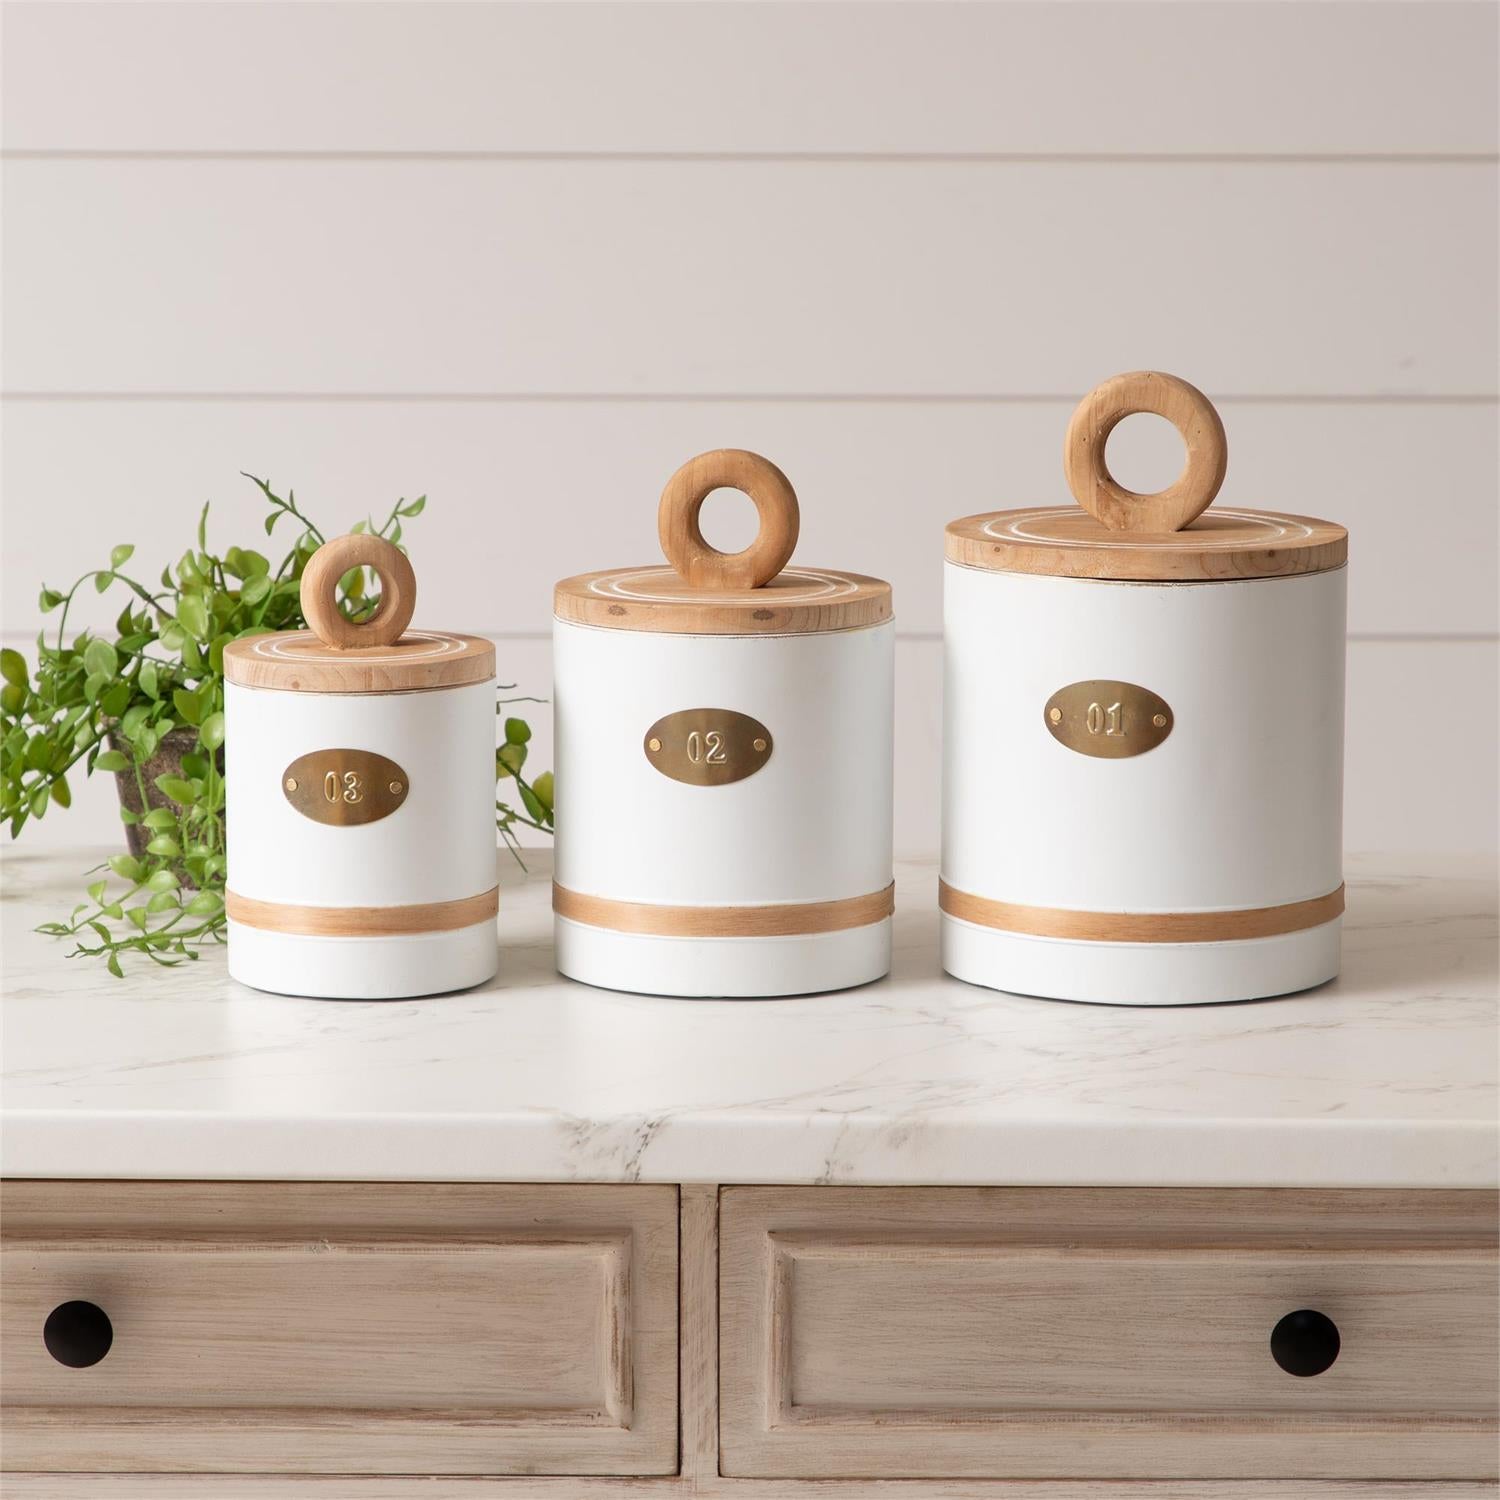 White And Gold Canisters #1, #2, #3